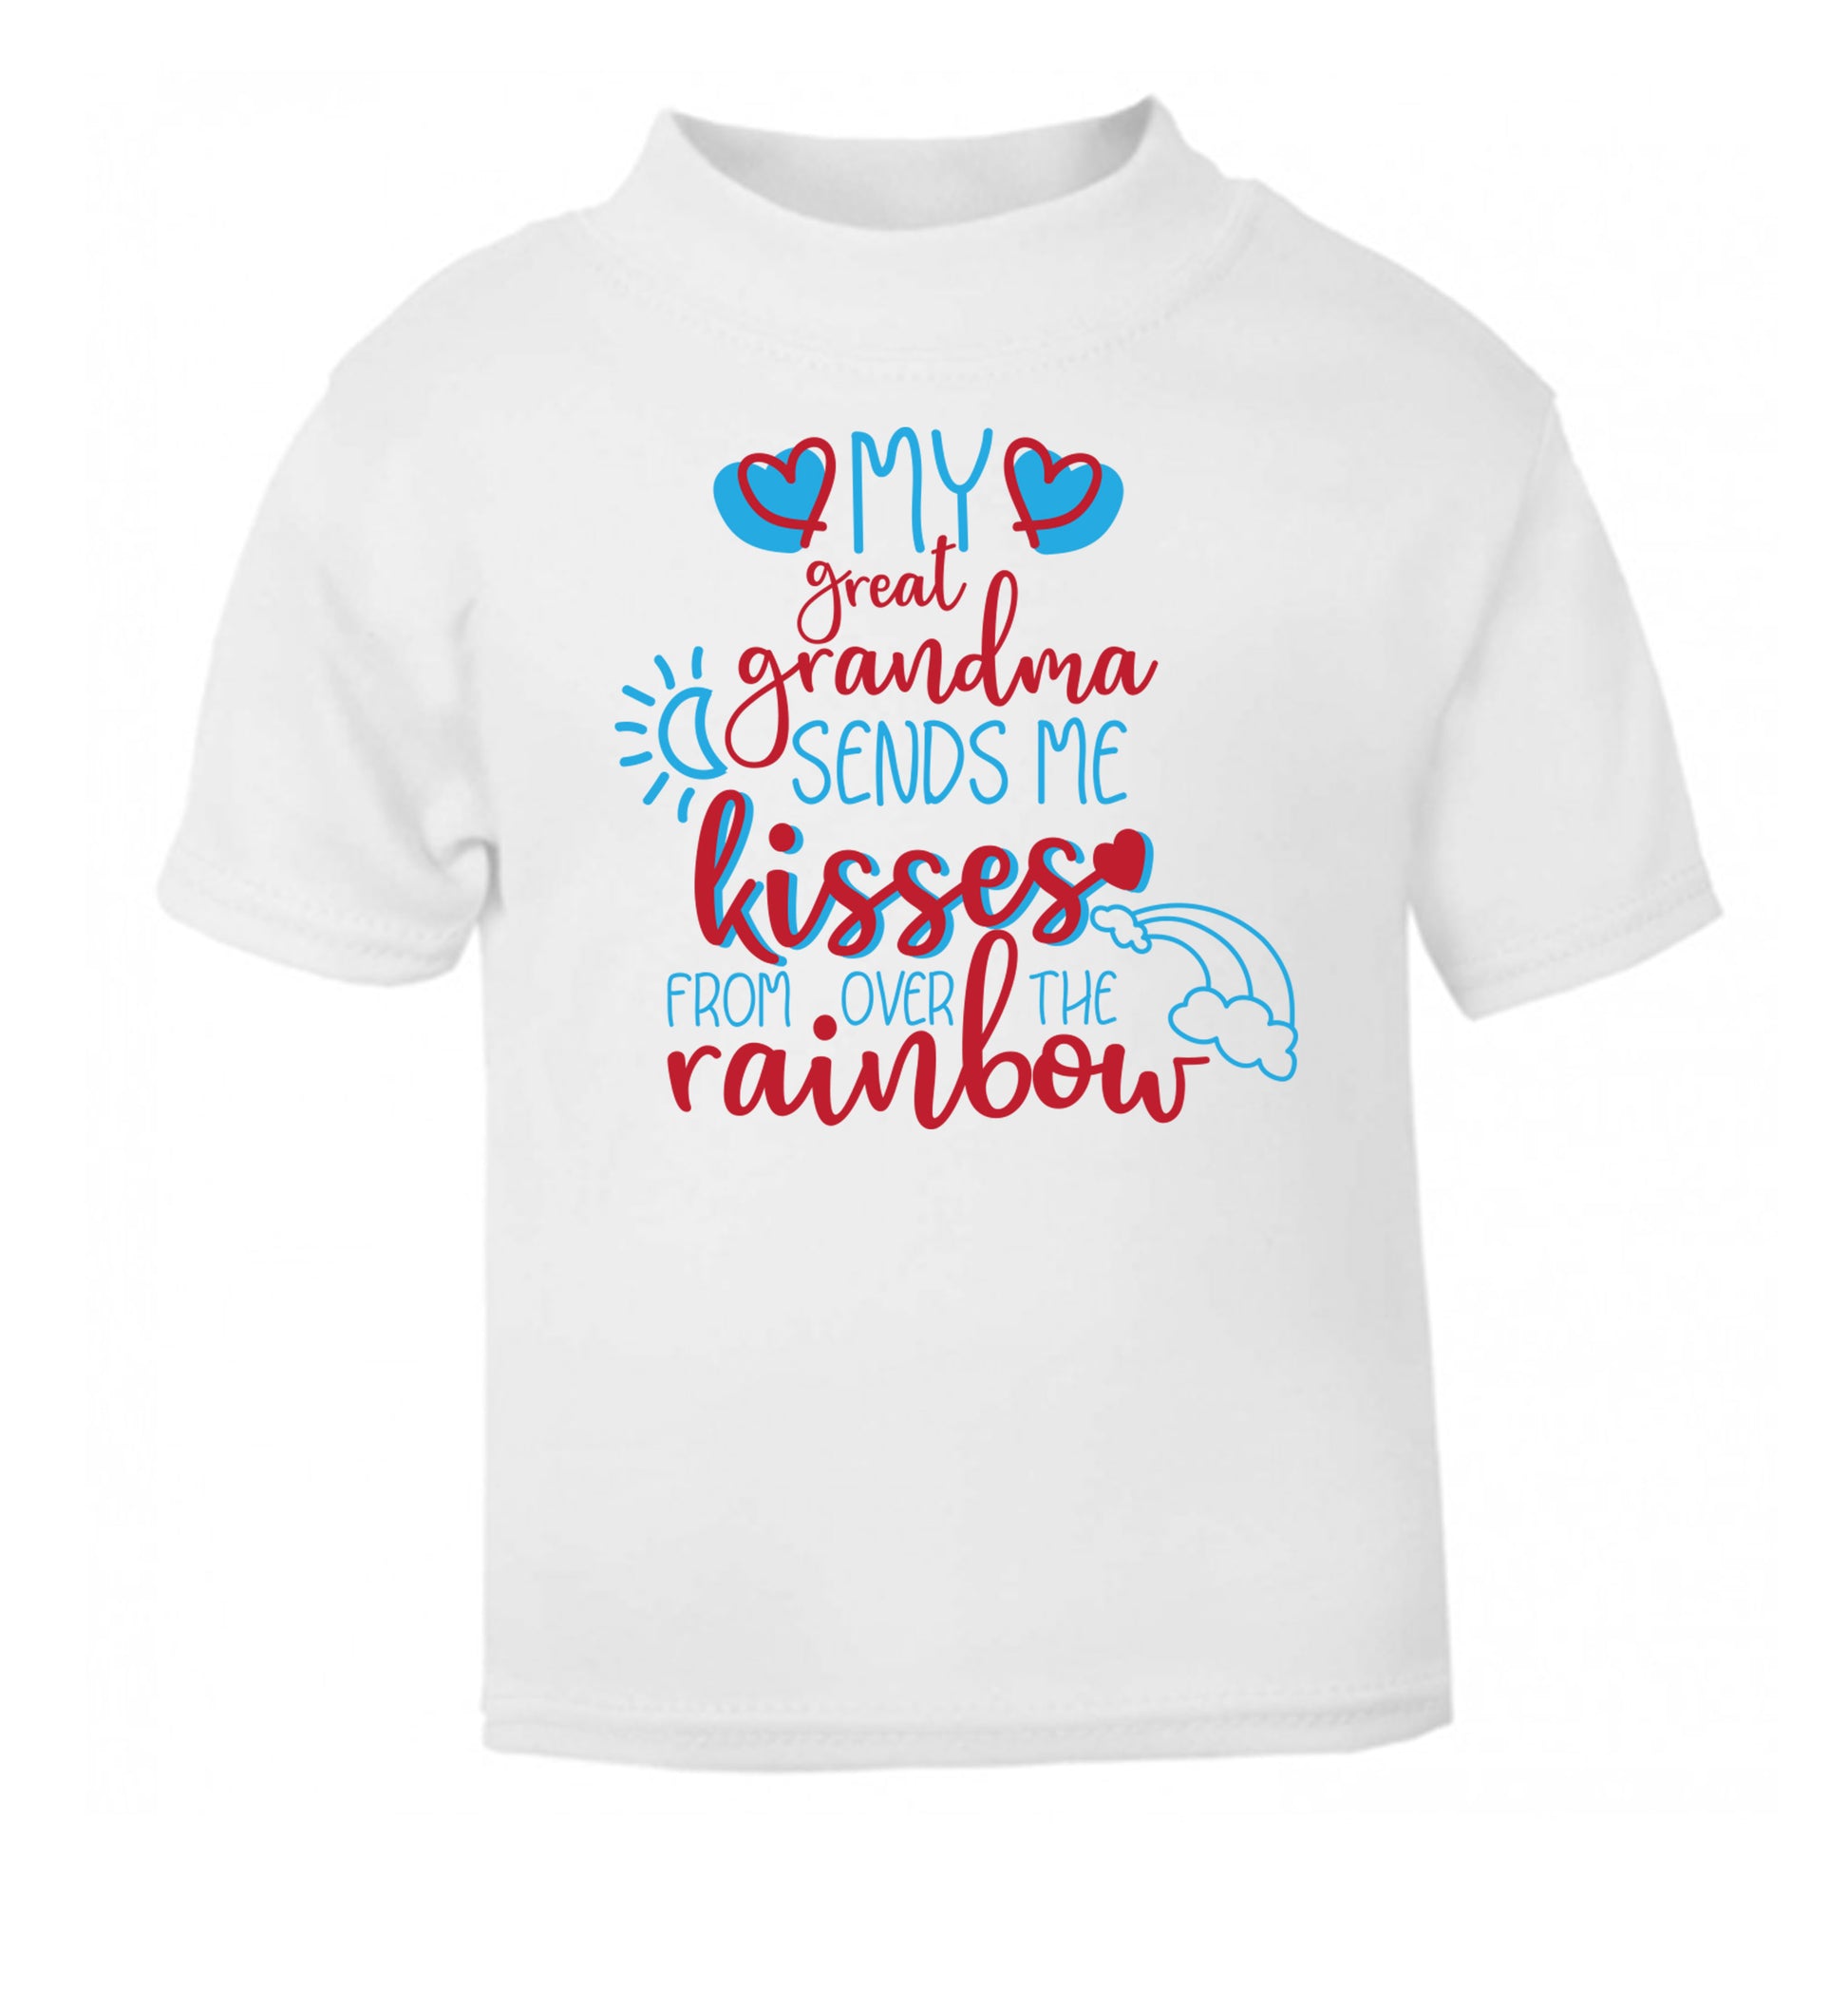 My great grandma sends me kisses from over the rainbow white Baby Toddler Tshirt 2 Years